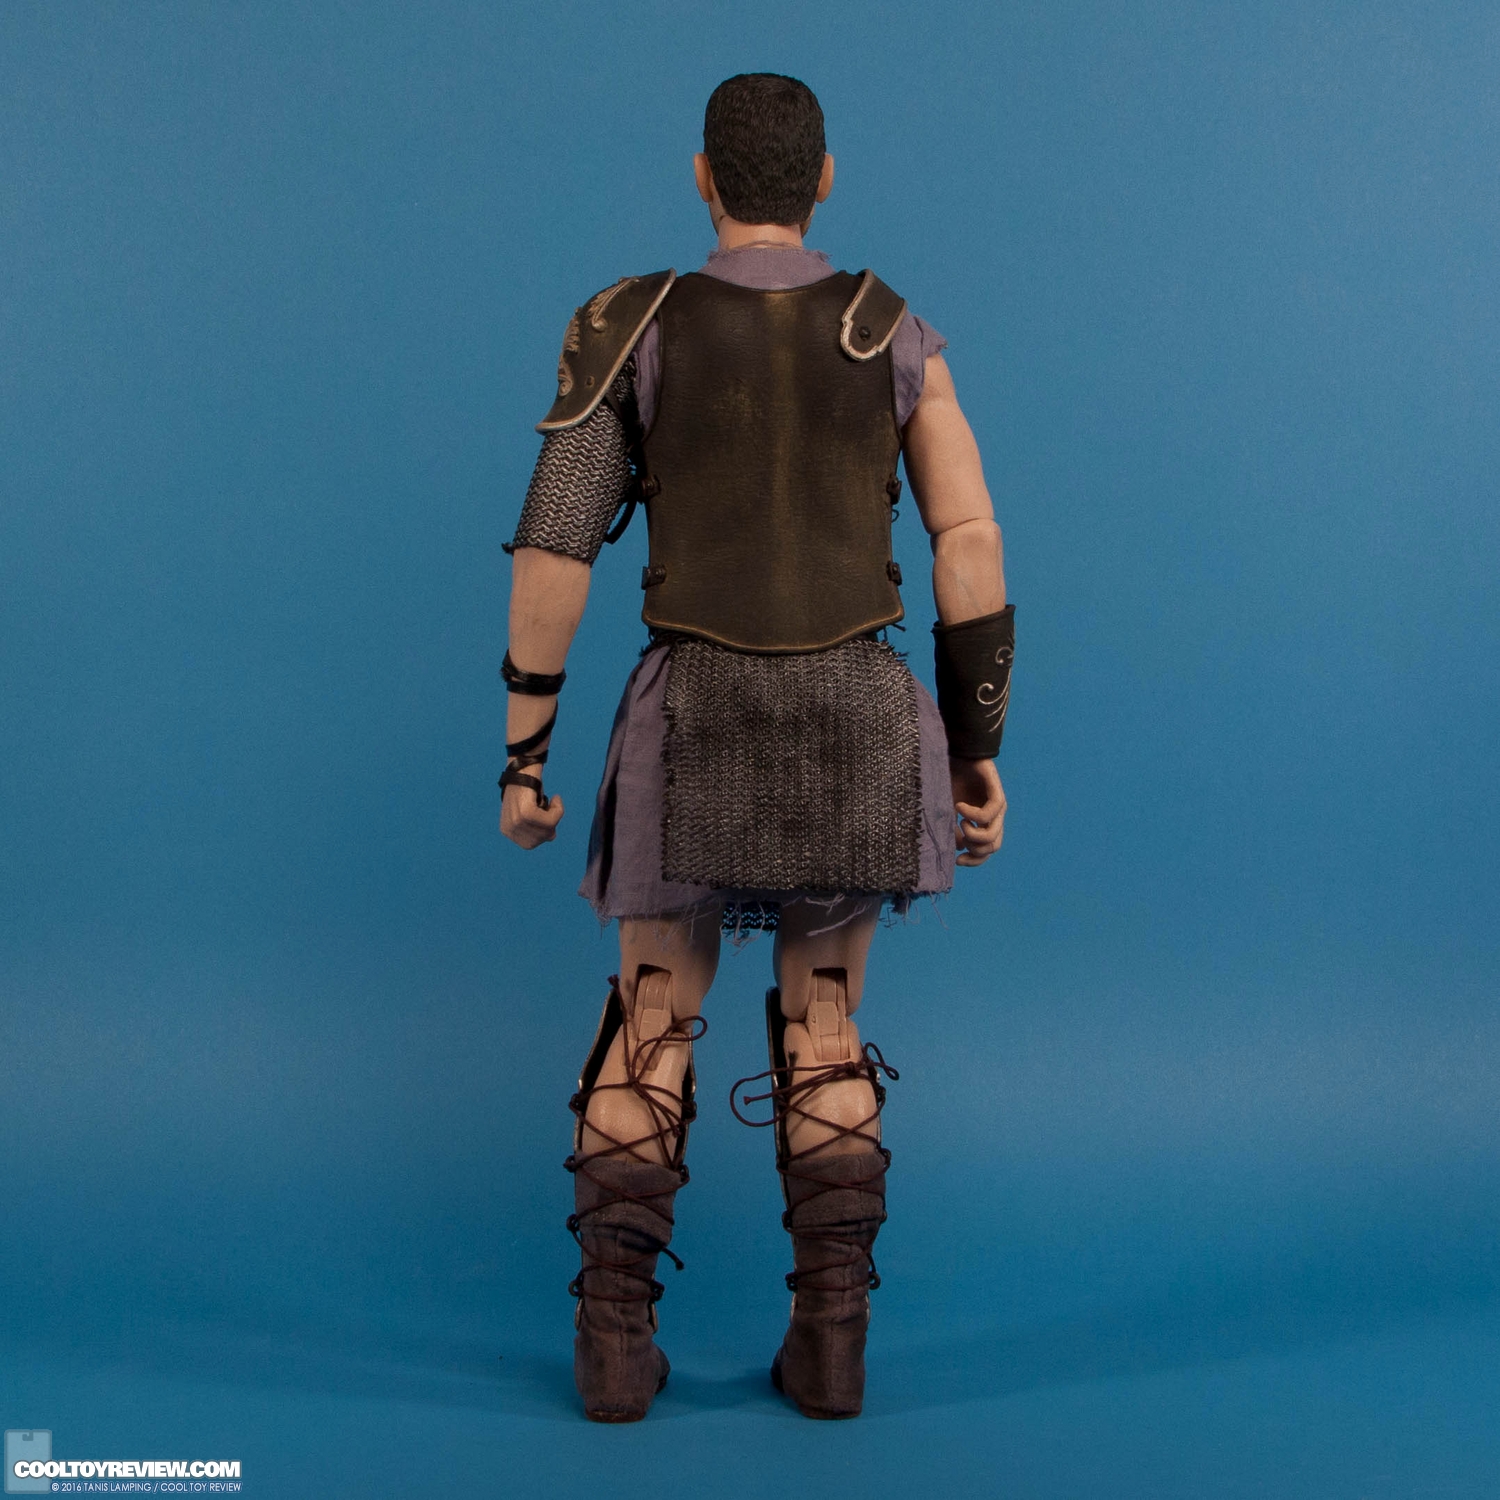 pangaea-toy-gladiator-general-sixth-scale-collectible-figure-004.jpg